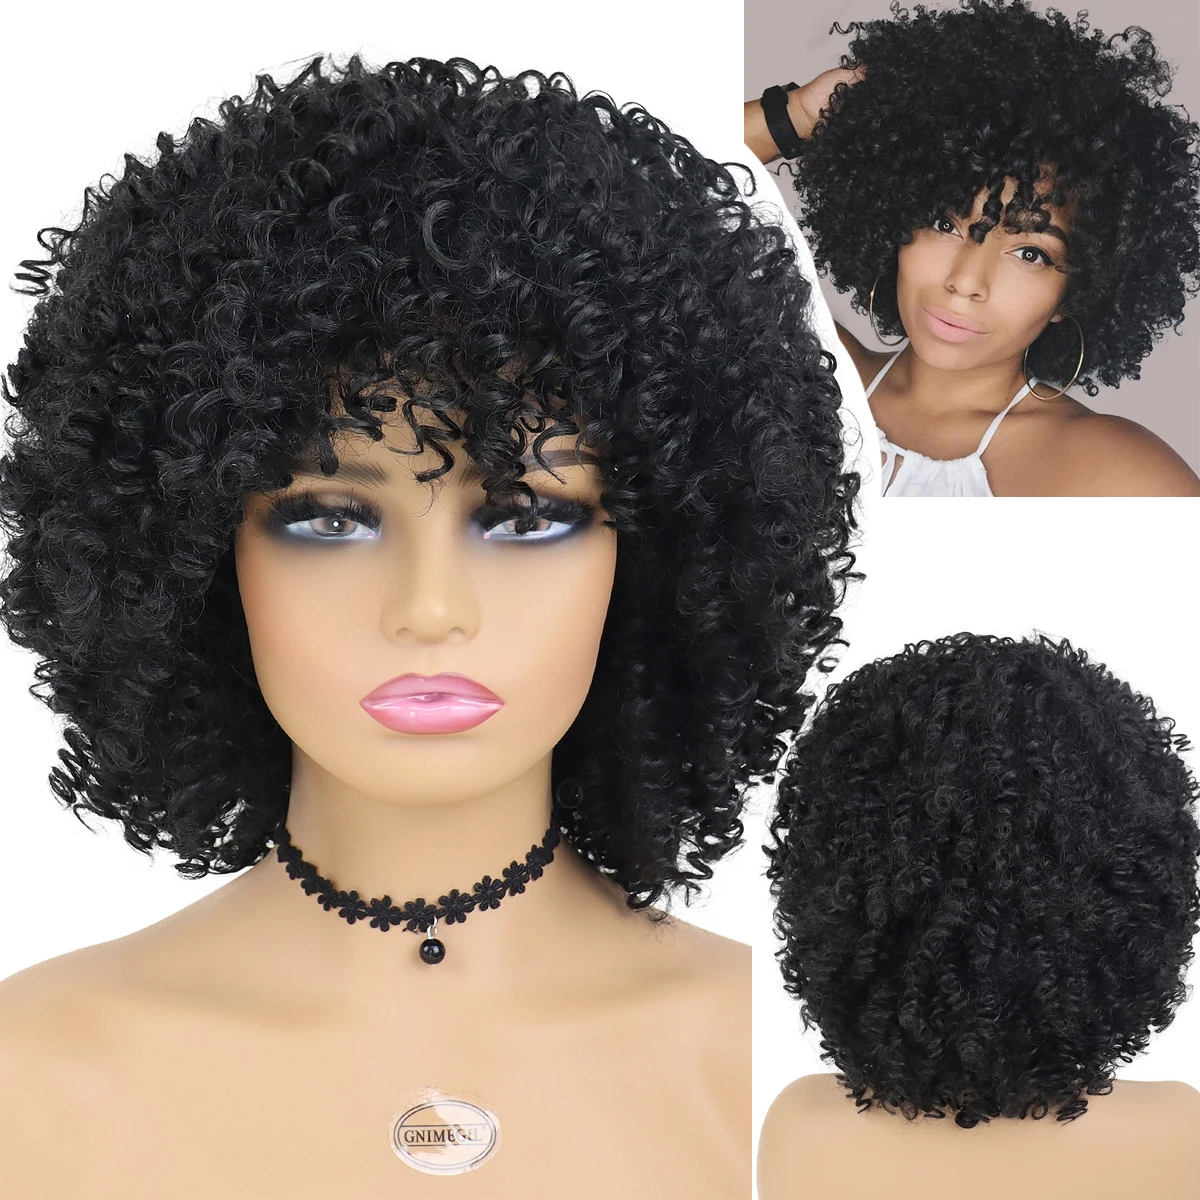 

GNIMEGIL Wigs for Black Women Synthetic Hair Curly Wig with Bangs Afro Kinky Colly Hairstyle Natural African Wigs Short Curls